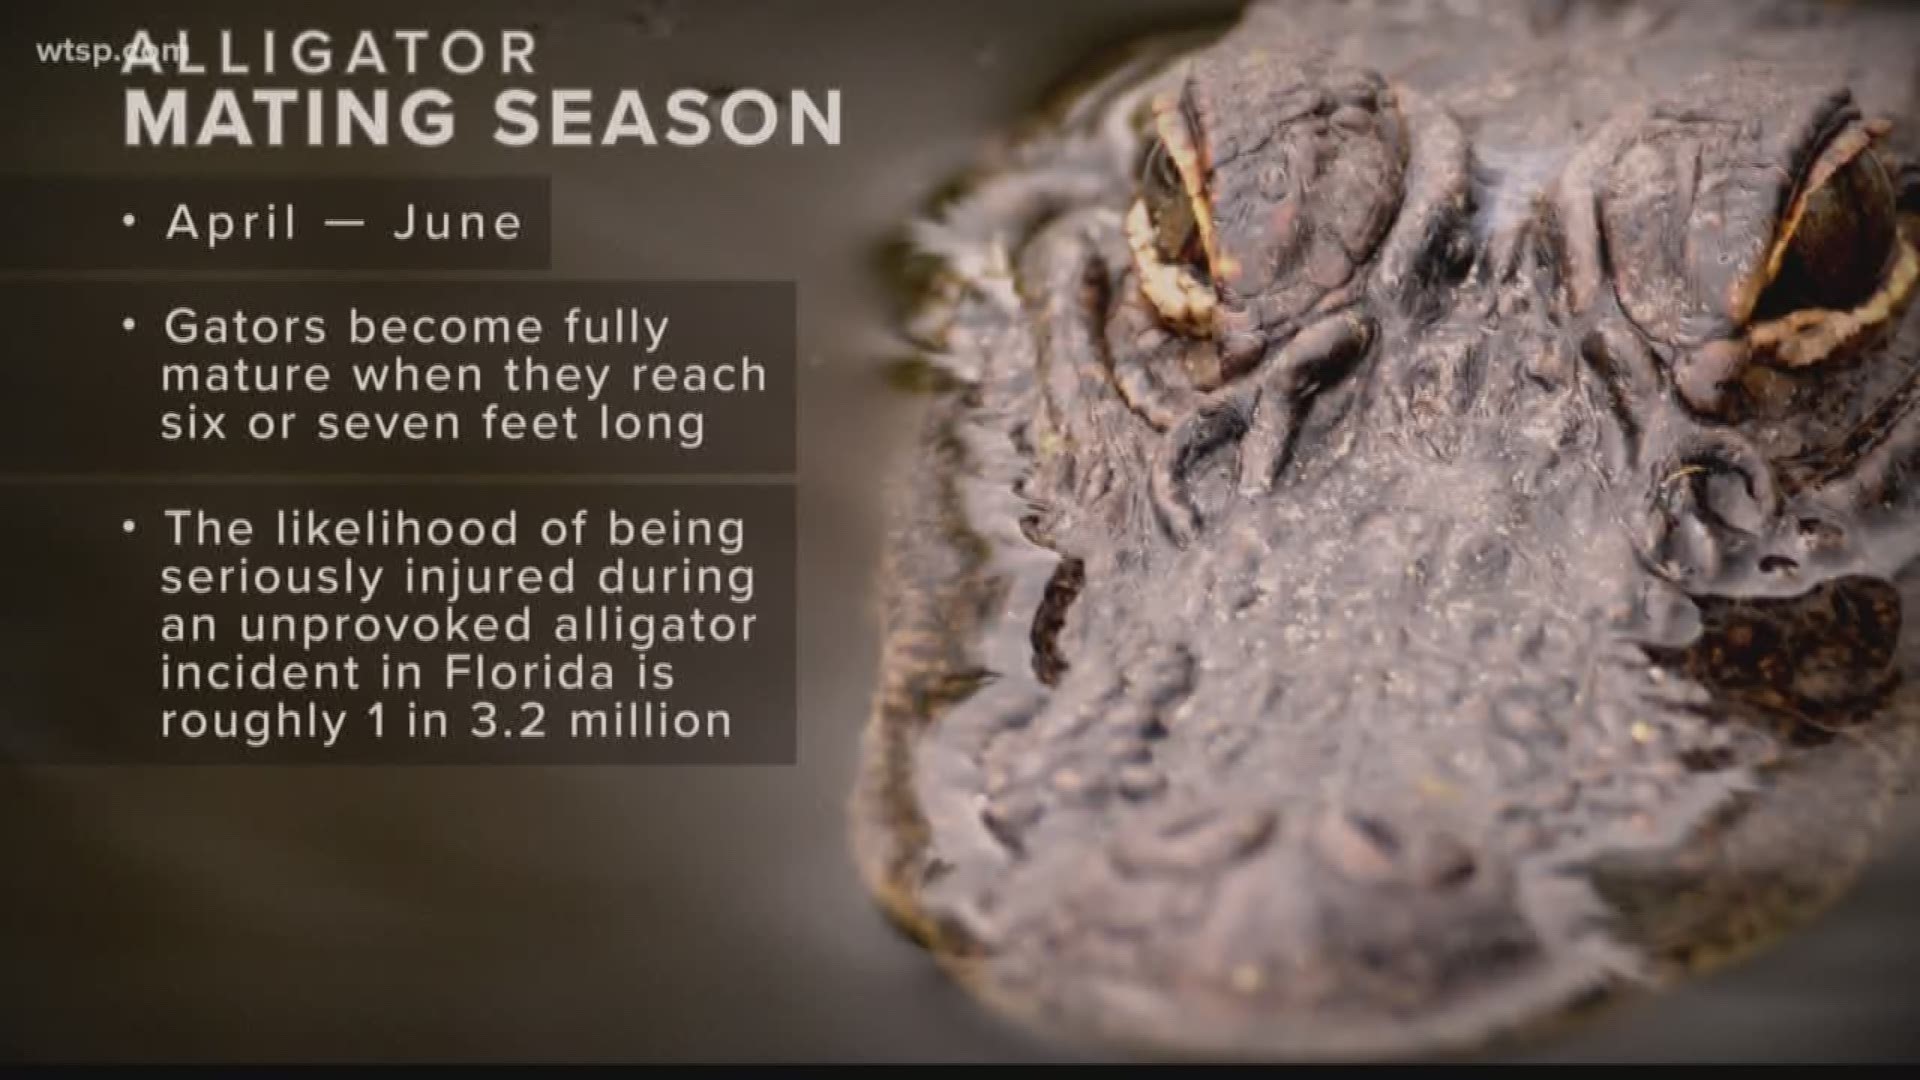 Alligators are more aggressive during their mating season. During the mating season last June, a 12 and a-half-foot gator pulled a woman into a Florida pond and killed her.